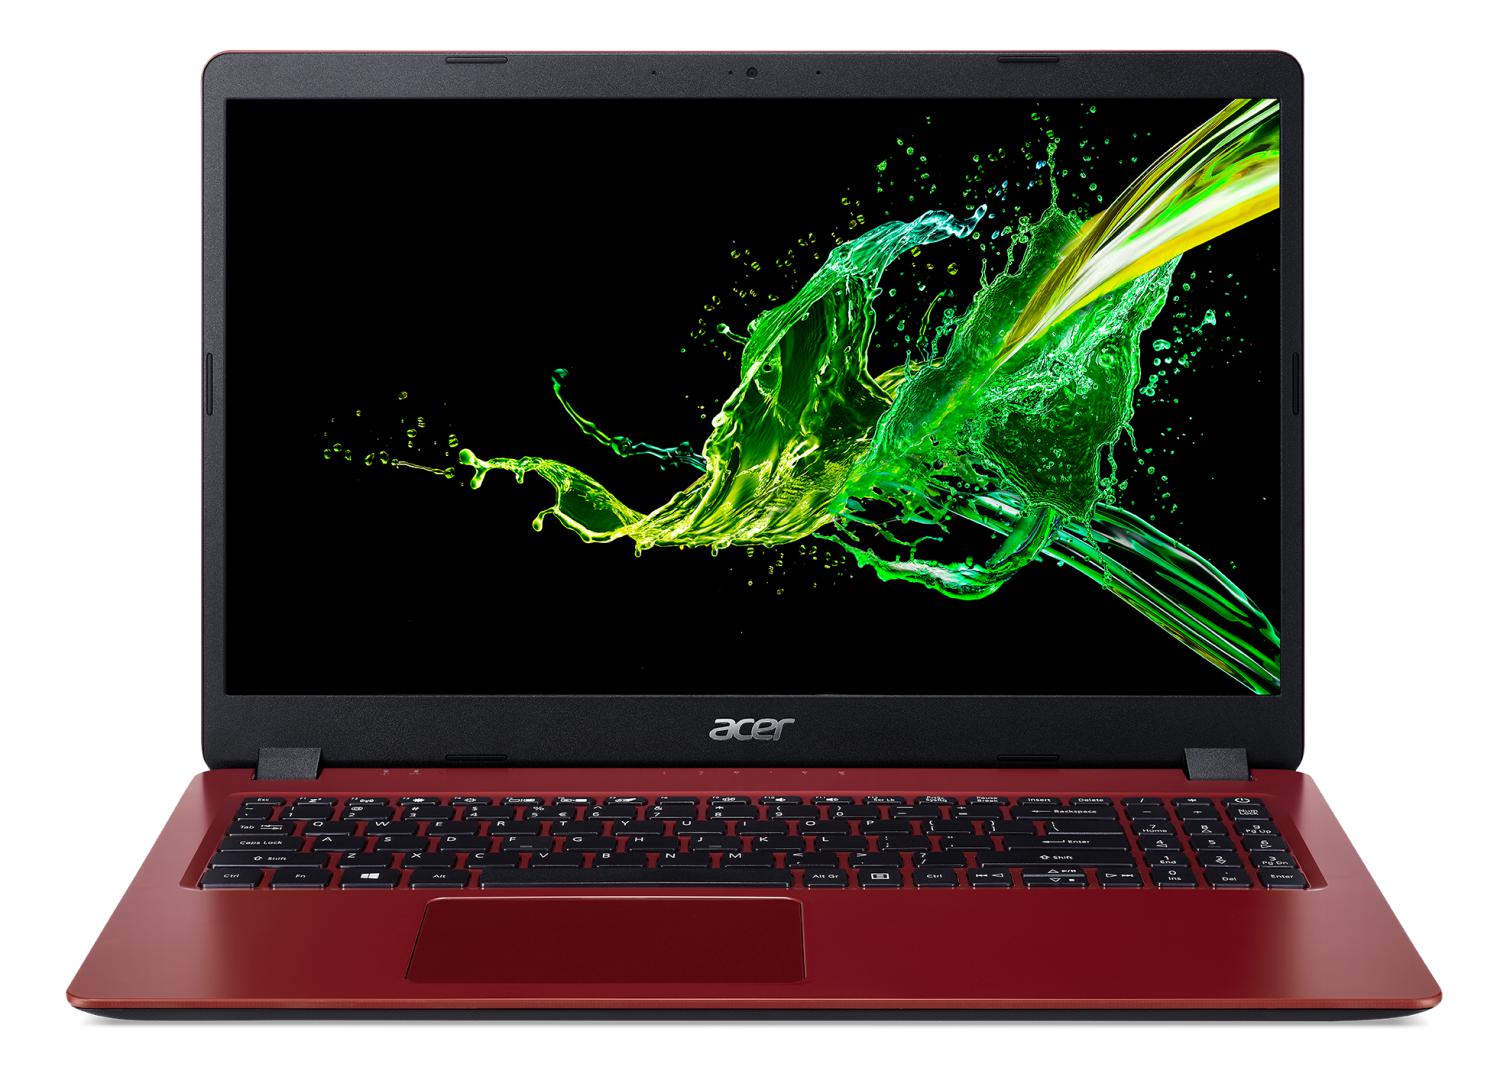 Laptop Acer Aspire 3, A315-56, 15.6" Full HD, Intel Core i3-1005G1, RAM 8GB DDR4, SSD 256 GB, Boot-up Linux